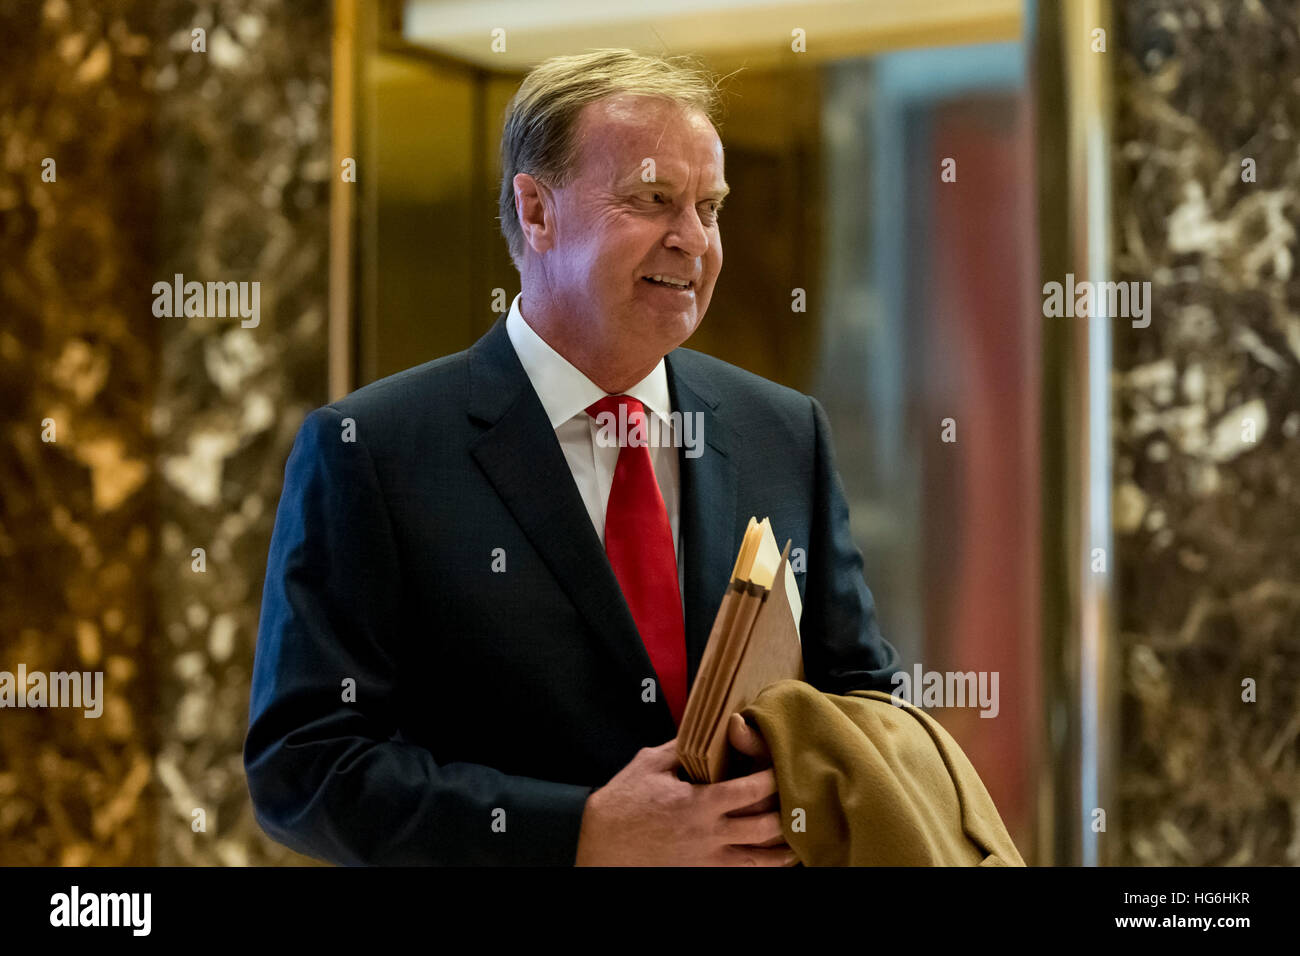 New York, USA. 5th Jan, 2017. Kip Tom, a past agriculture advisor to President-elect Donald Trump, is seen upon his arrival in the lobby of Trump Tower in New York, NY, USA on January 5, 2017. Credit: MediaPunch Inc/Alamy Live News Stock Photo